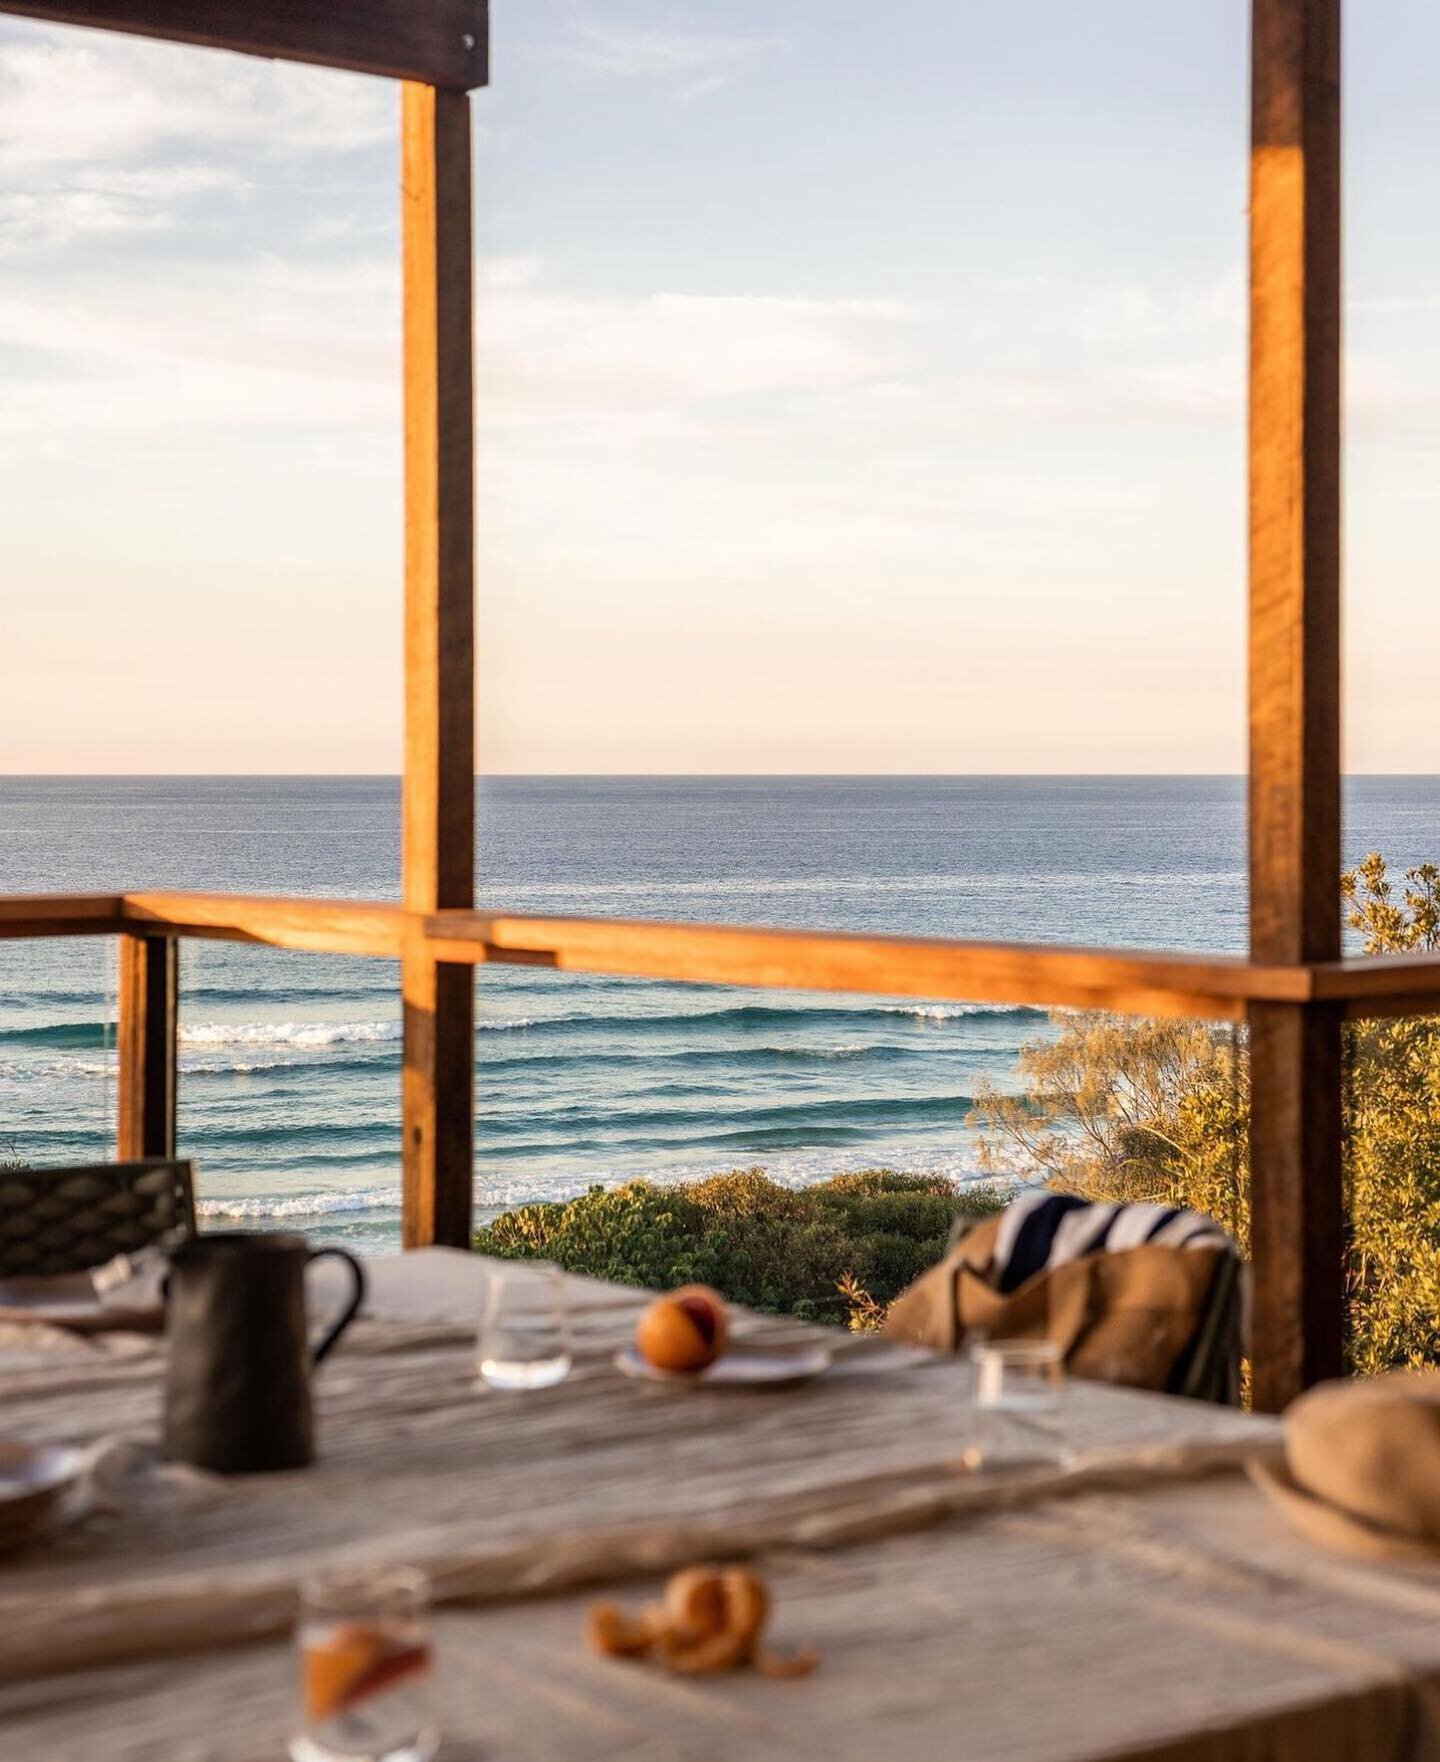 Stay salty and stay awhile @straddiegreenhouse 🌊 

A meticulously renovated holiday home on iconic Stradbroke Island with panoramic, uninterrupted ocean vistas. A swift 20-minute journey from the ferry dock but a world away from everything, the hori